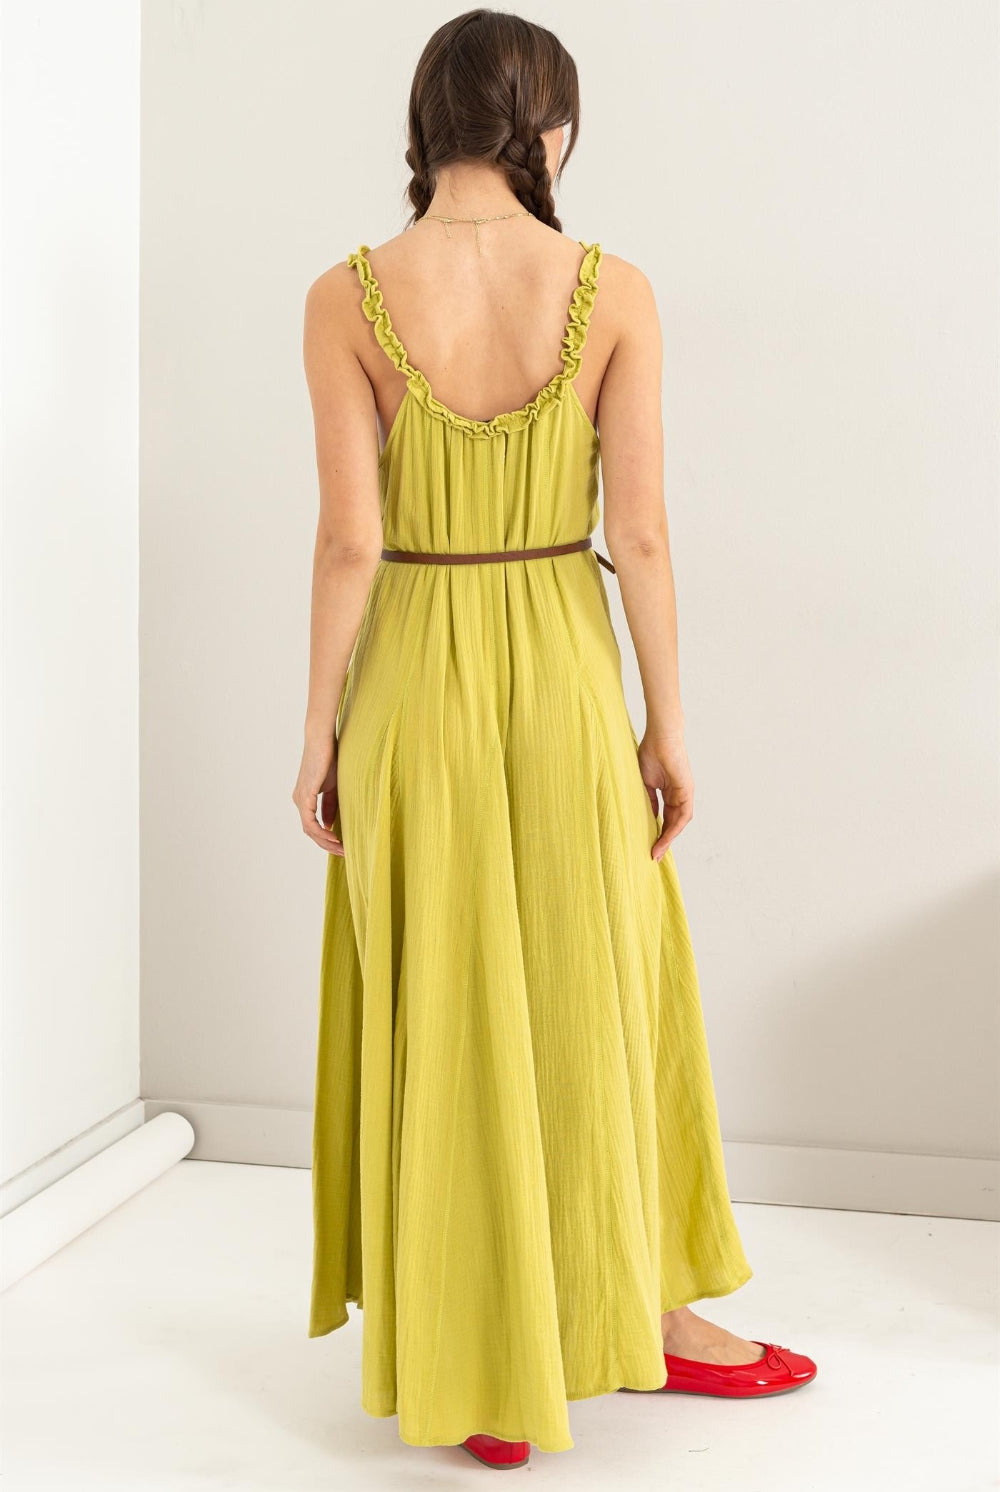 Woman wearing a sleeveless frill maxi dress with a flowy A-line silhouette.